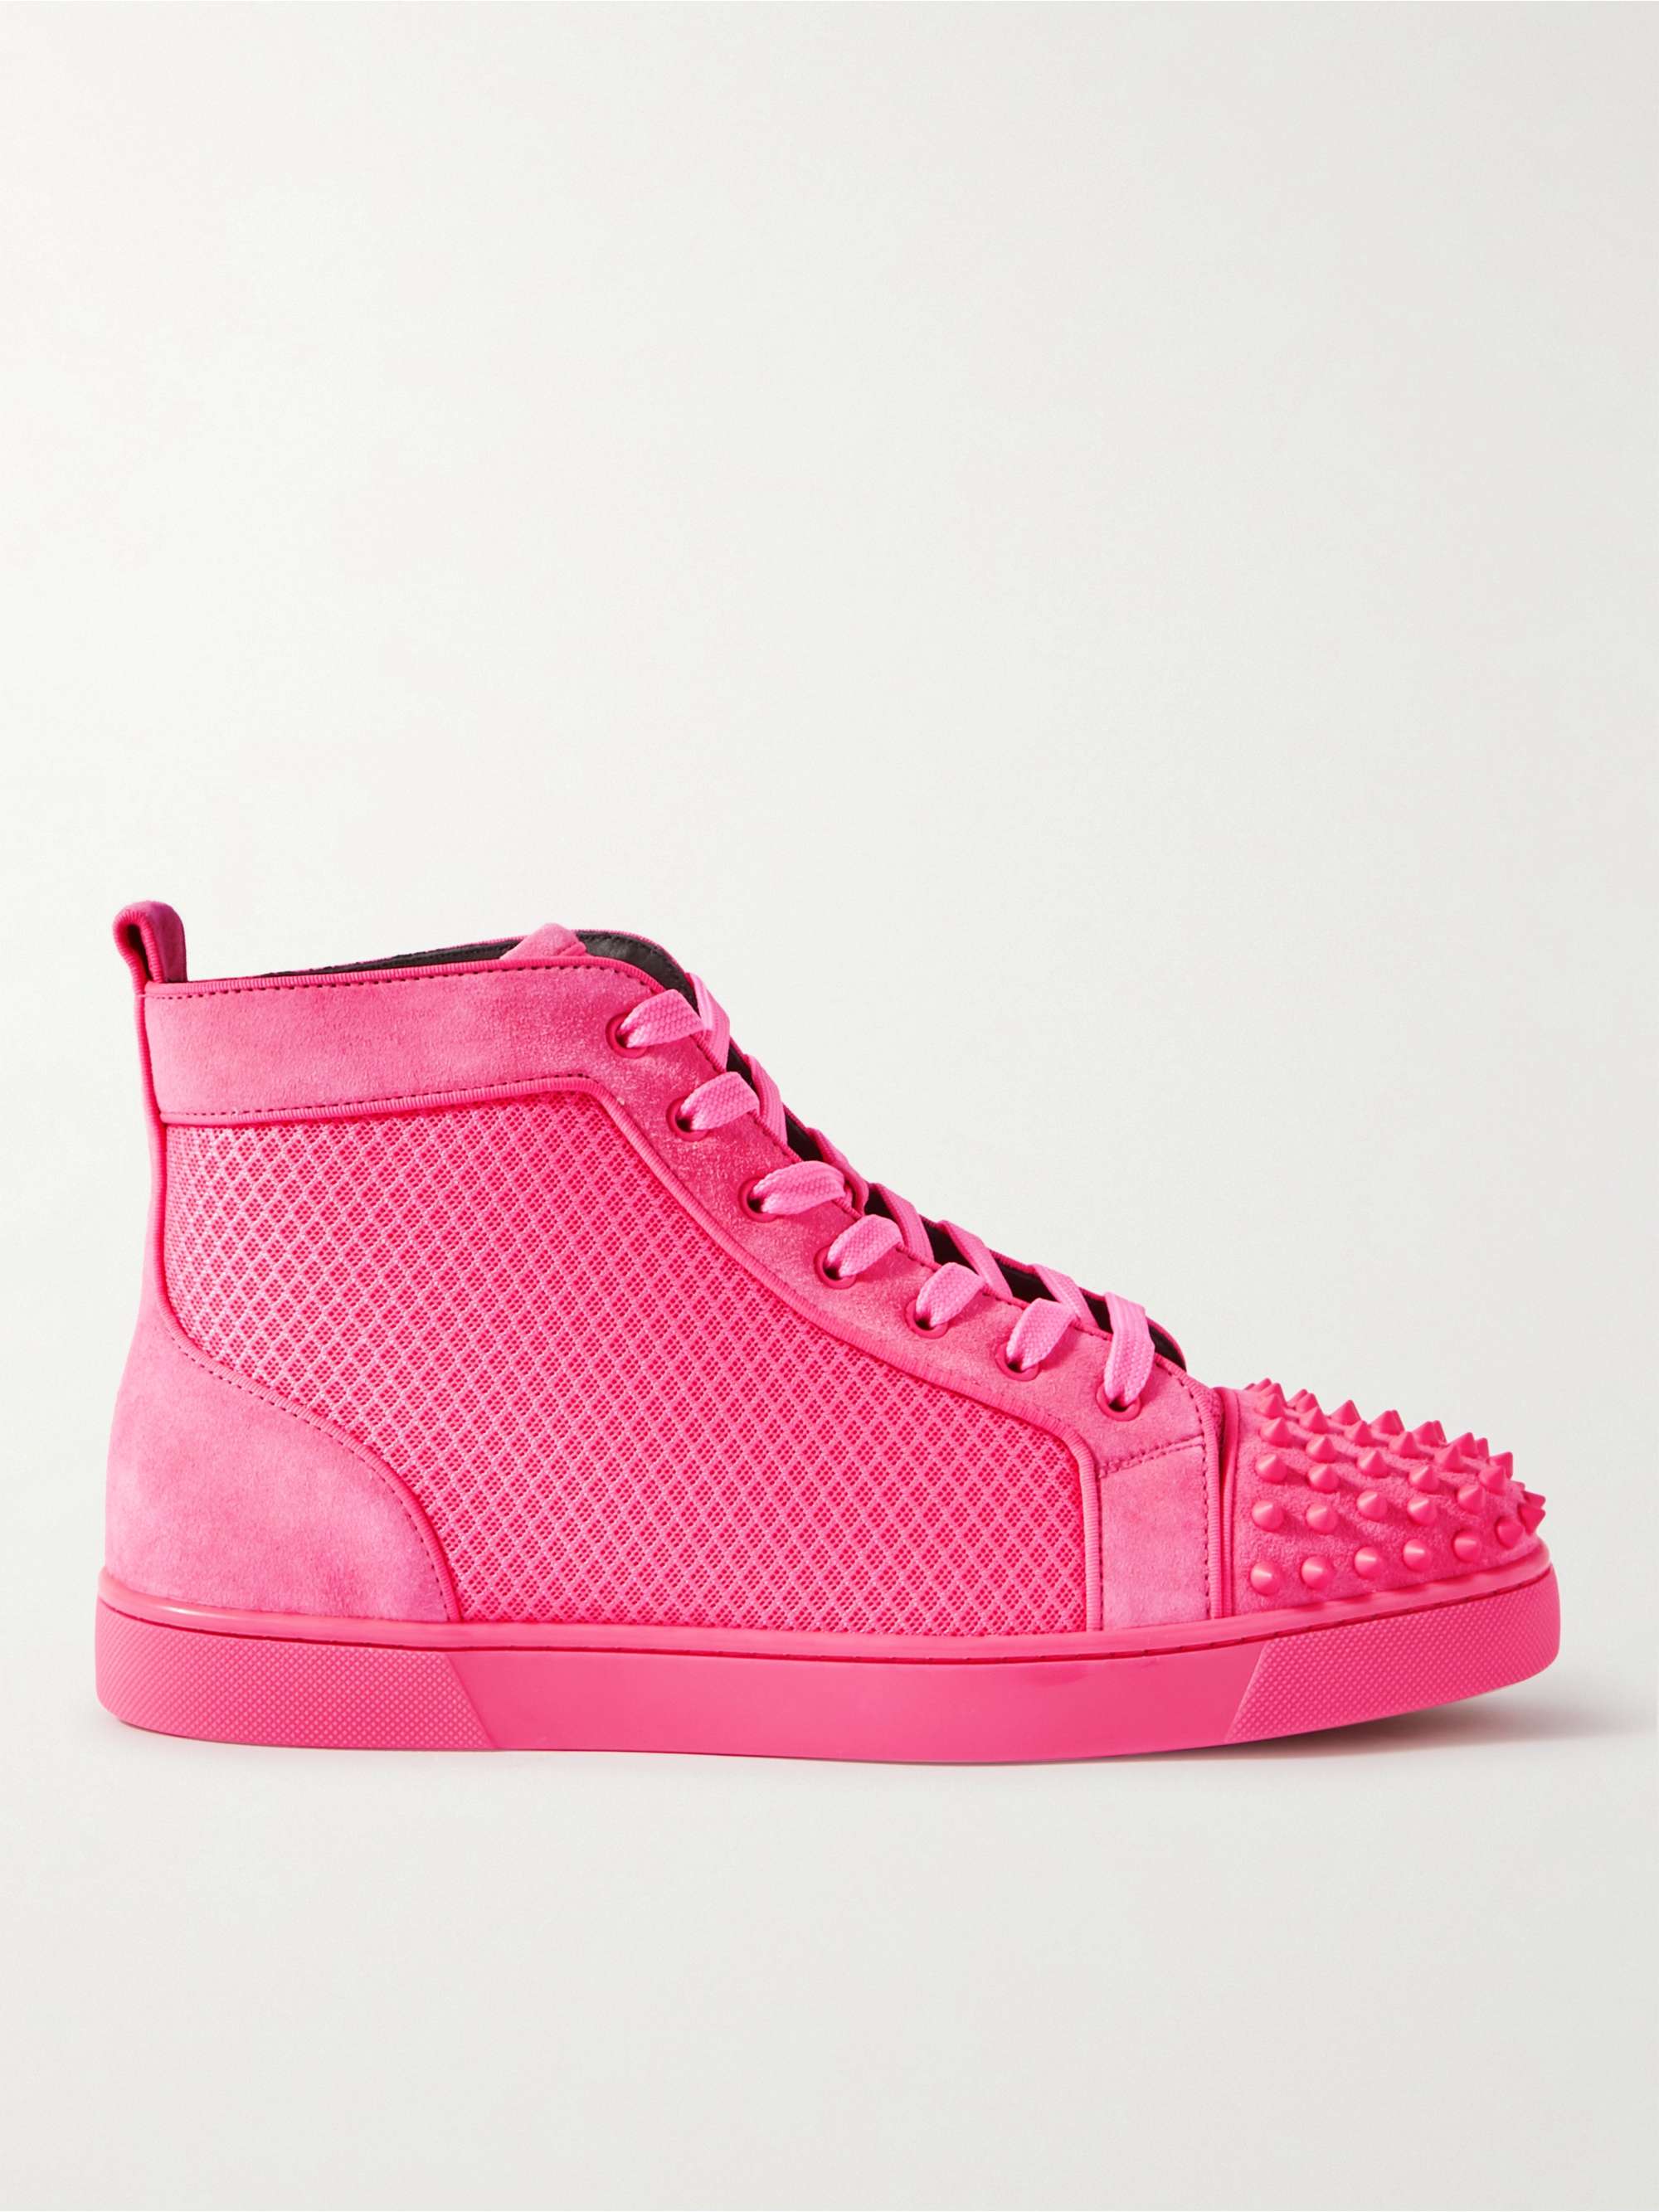 CHRISTIAN LOUBOUTIN Louis Spiked Suede-Trimmed Mesh High-Top Sneakers for  Men | MR PORTER